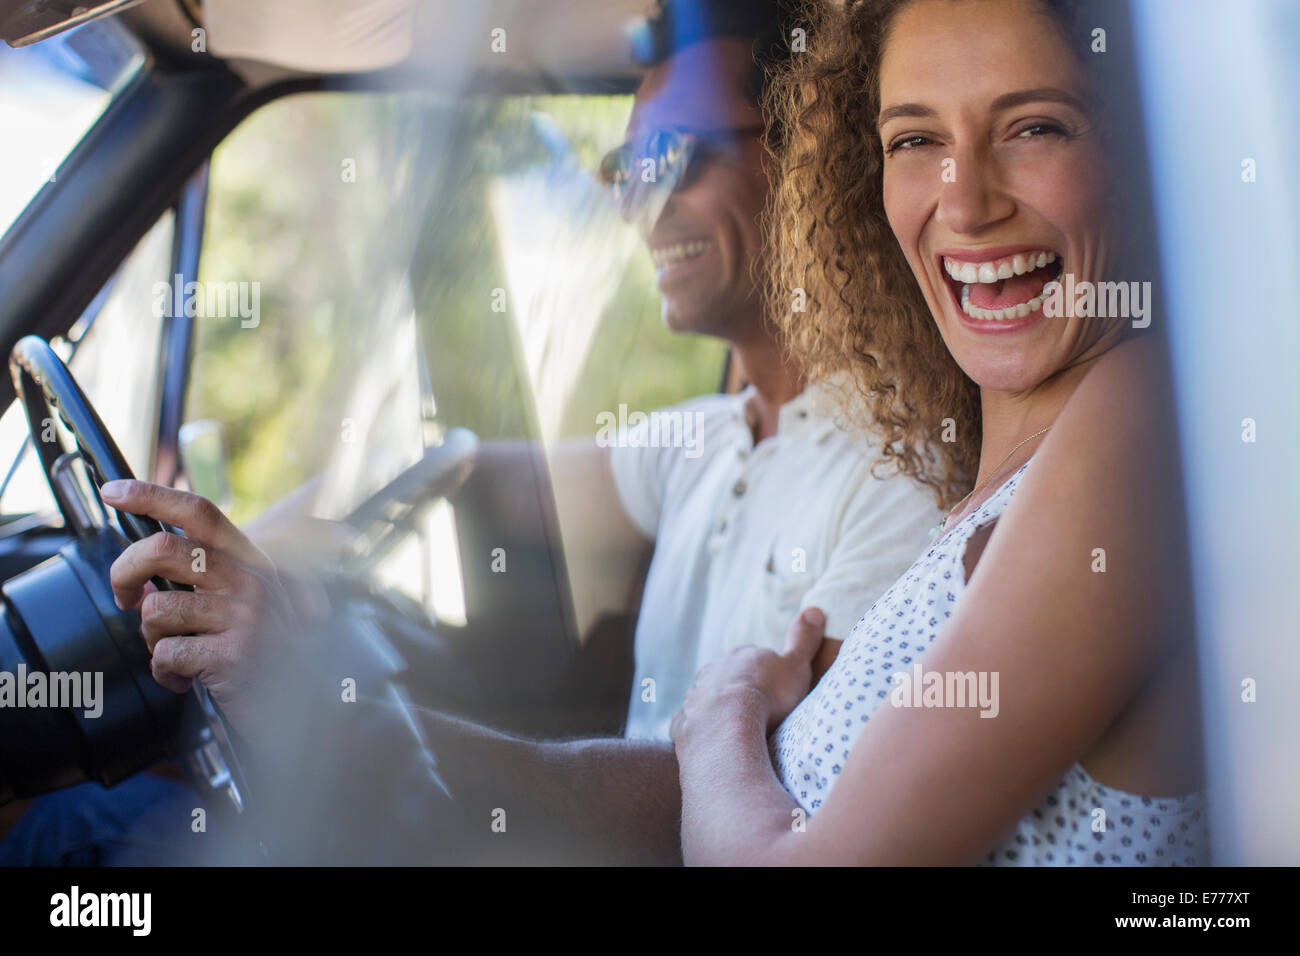 Couple riding in car together Stock Photo